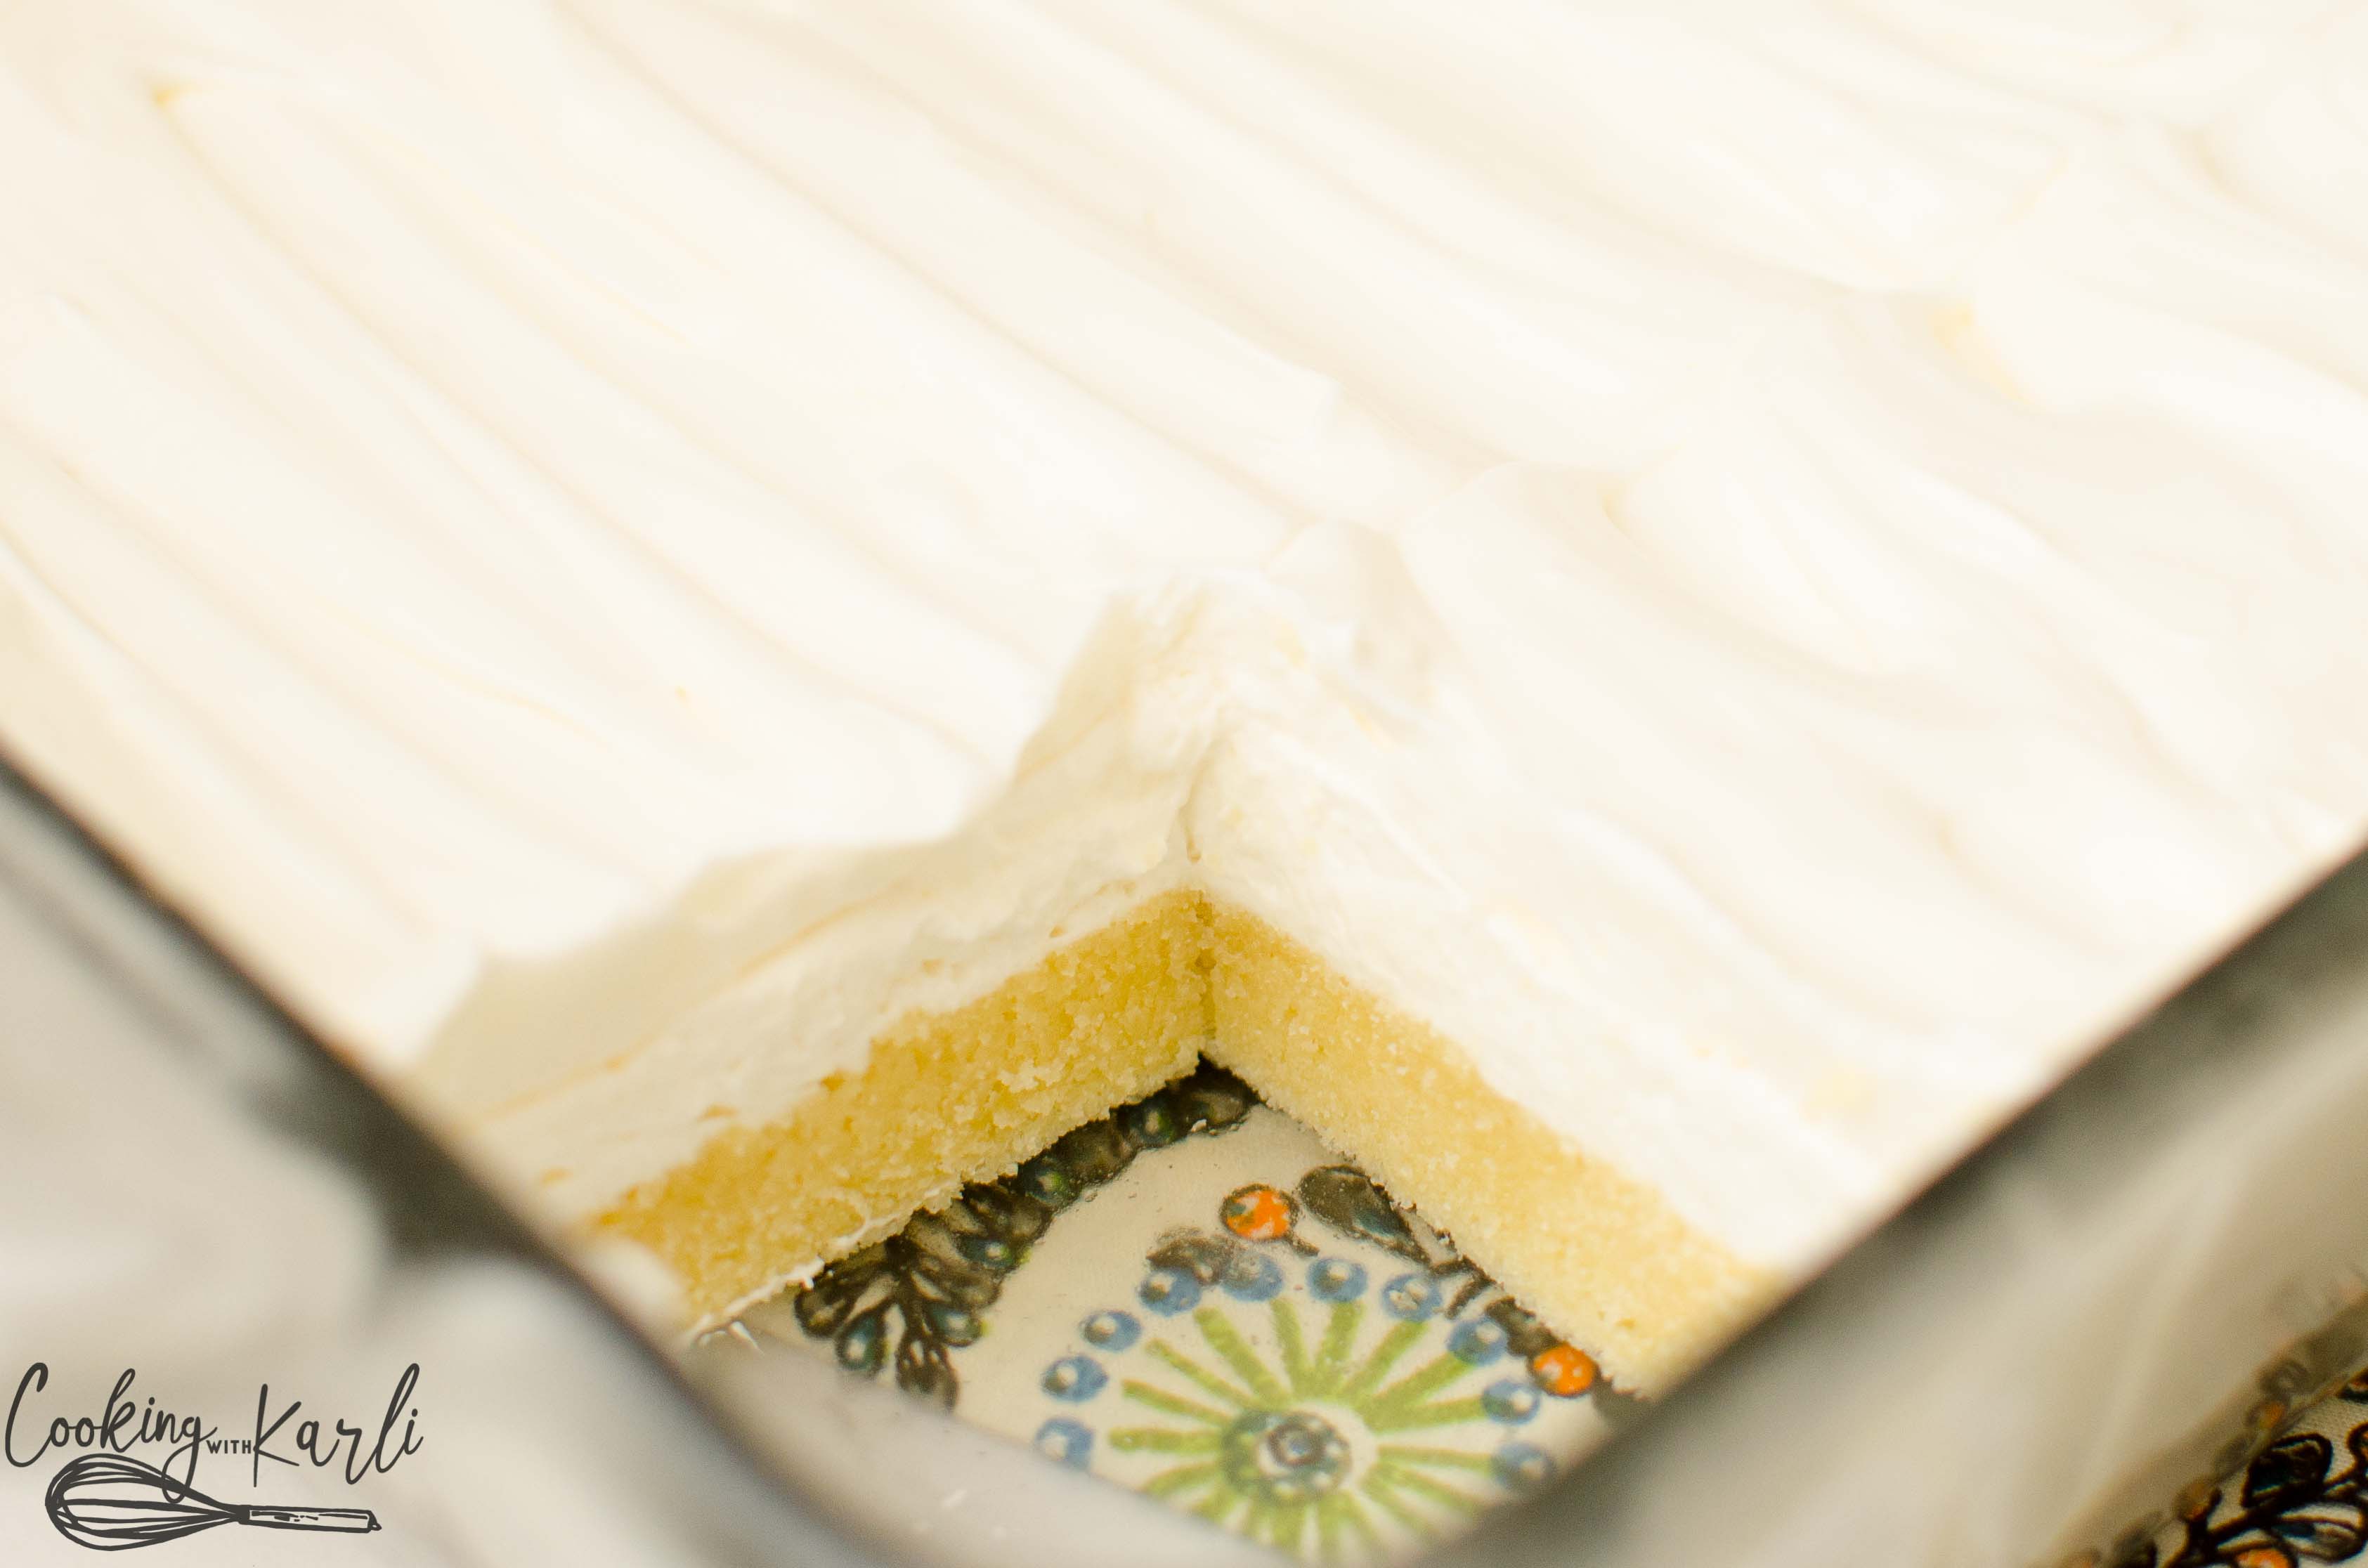 With a sugar cookie crust, cream cheese layer and a vanilla cool whip layer, this lush cake is sure to be a winner!